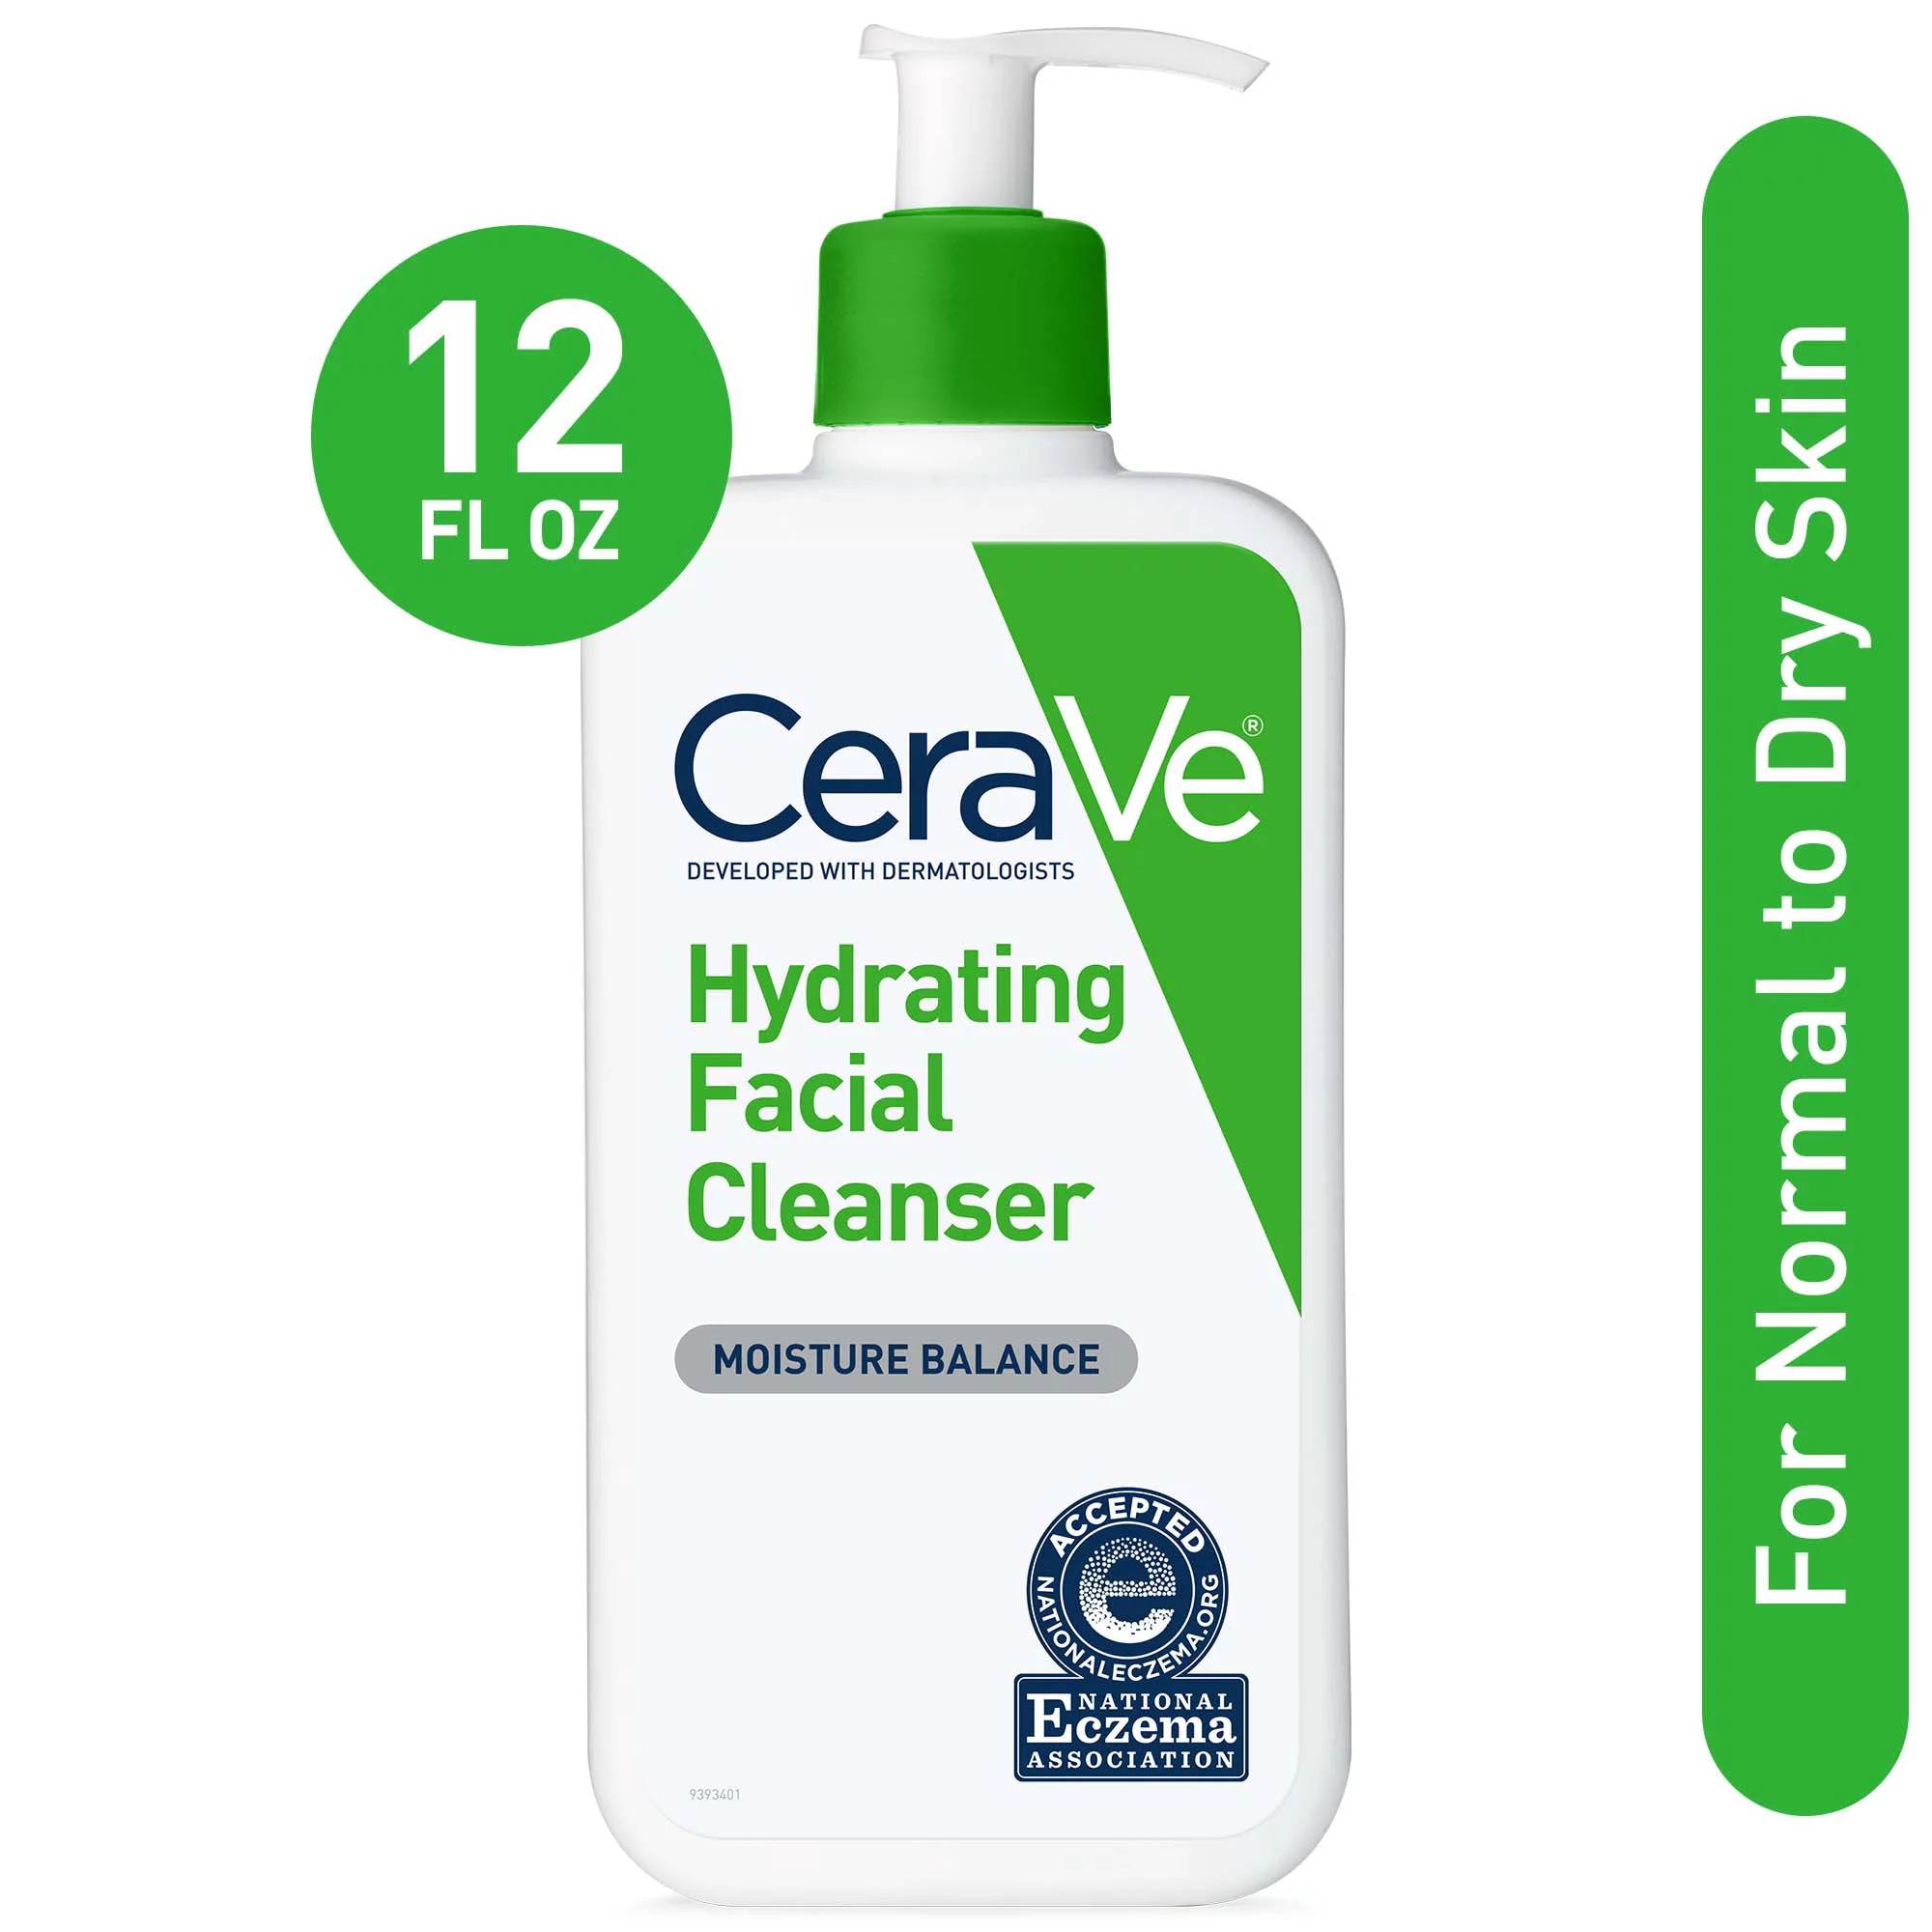 CeraVe Hydrating Facial Cleanser, Daily Face Wash for Normal to Dry Skin, 12 fl oz